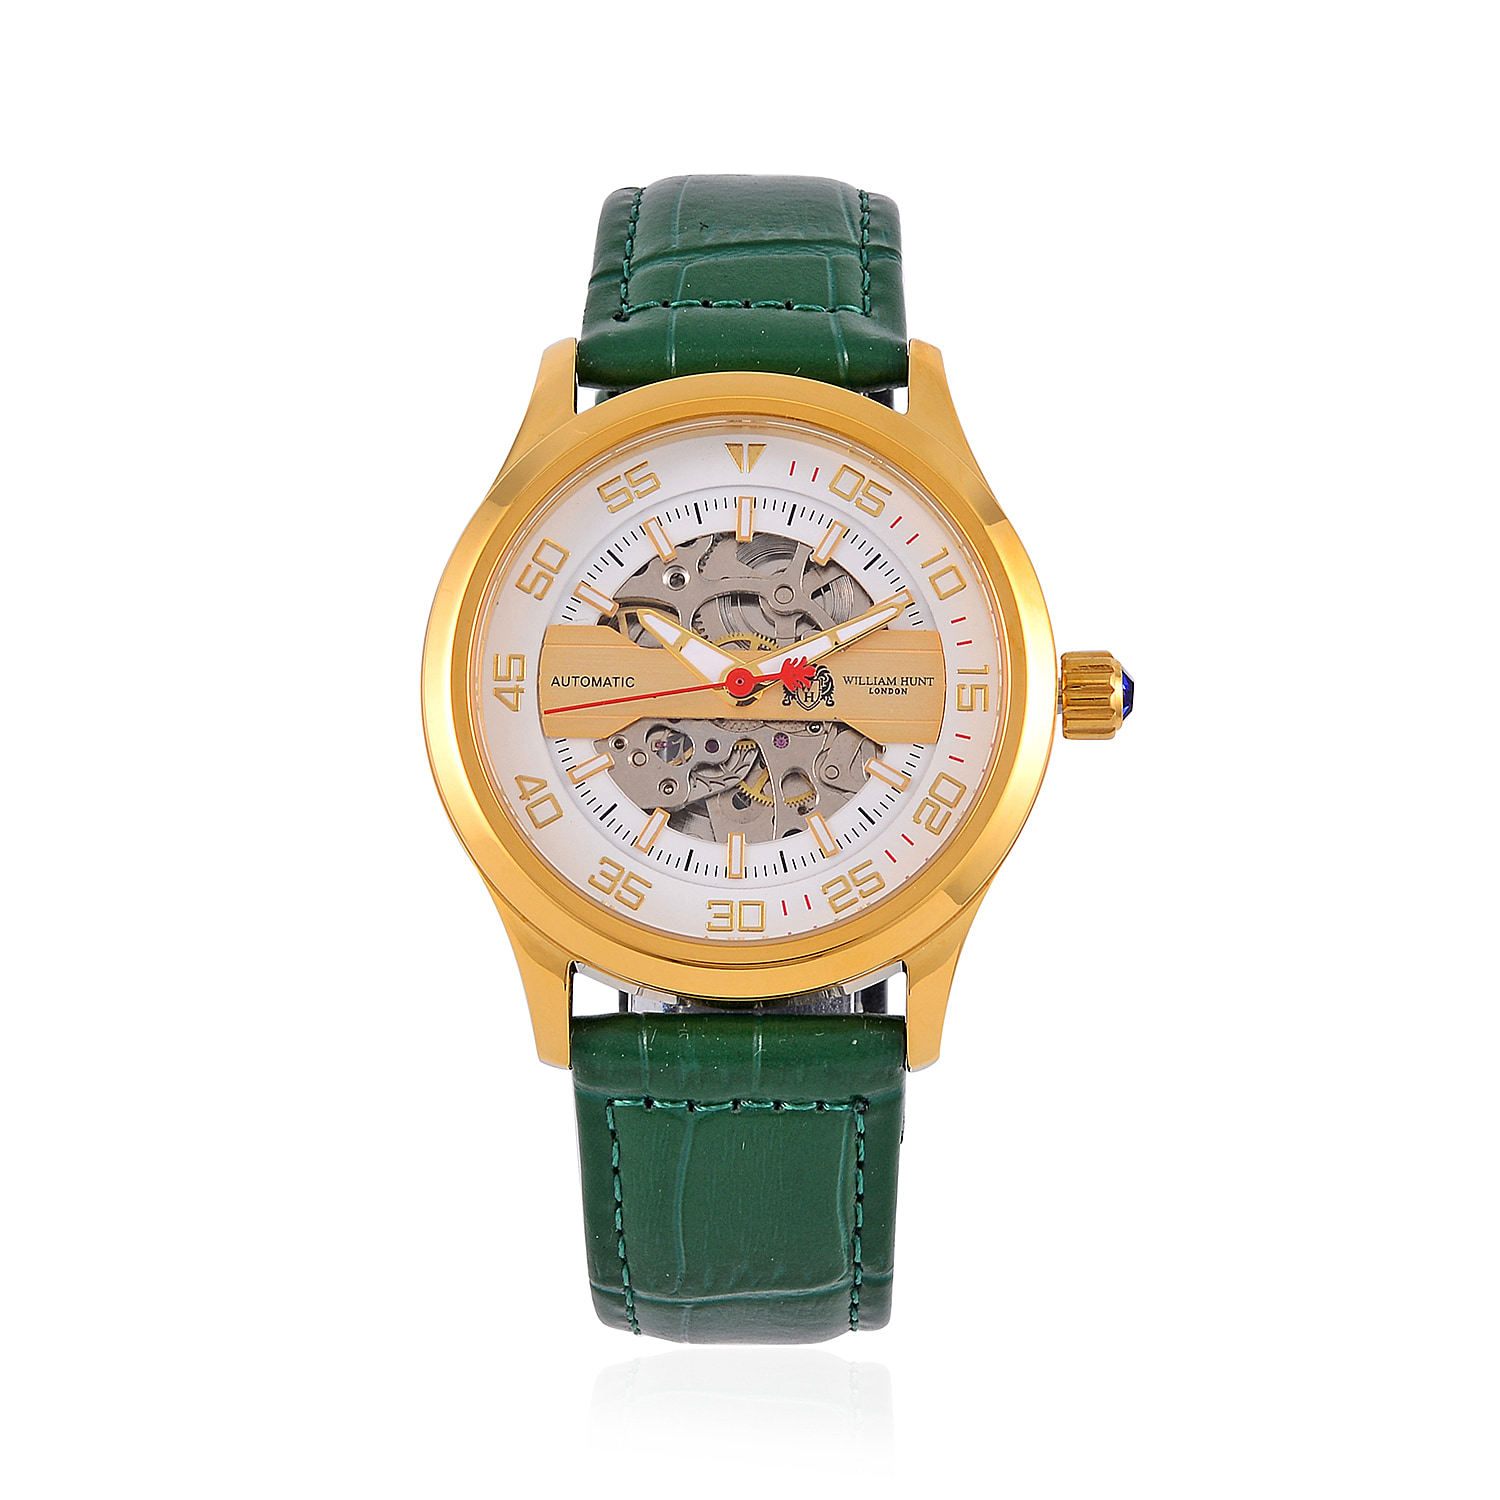 WILLIAM HUNT 5 ATM Water Resistant Automatic Movt. Watch in Gold Tone with Green Leather Strap